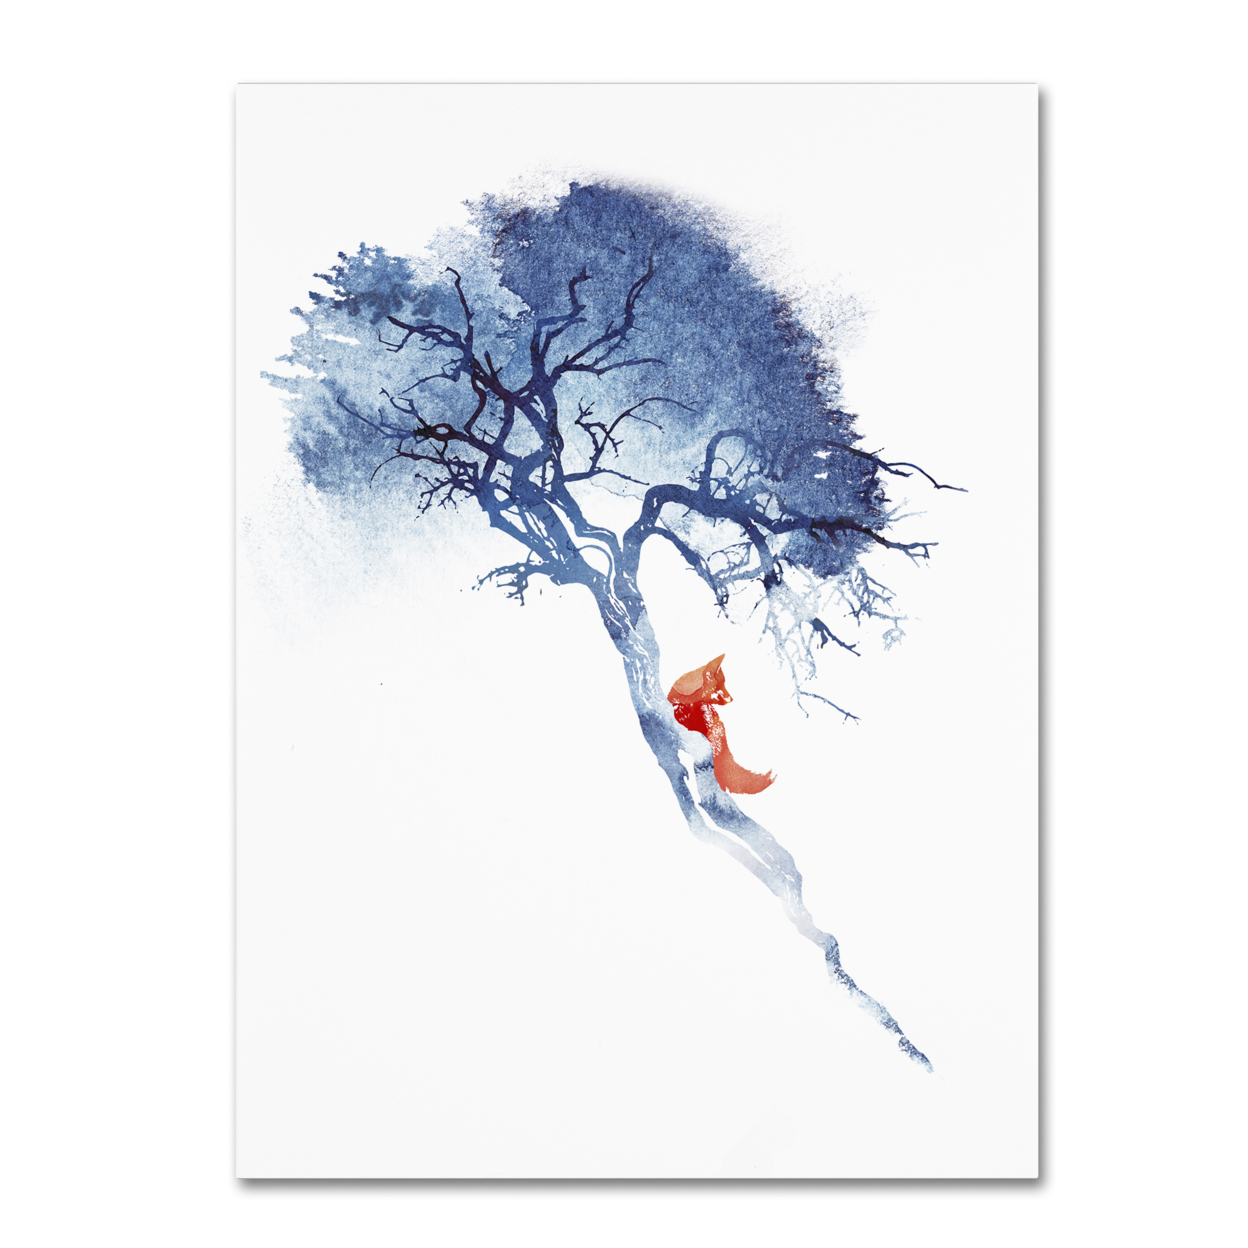 Robert Farkas 'There's No Way Back' Canvas Wall Art 35 X 47 Inches